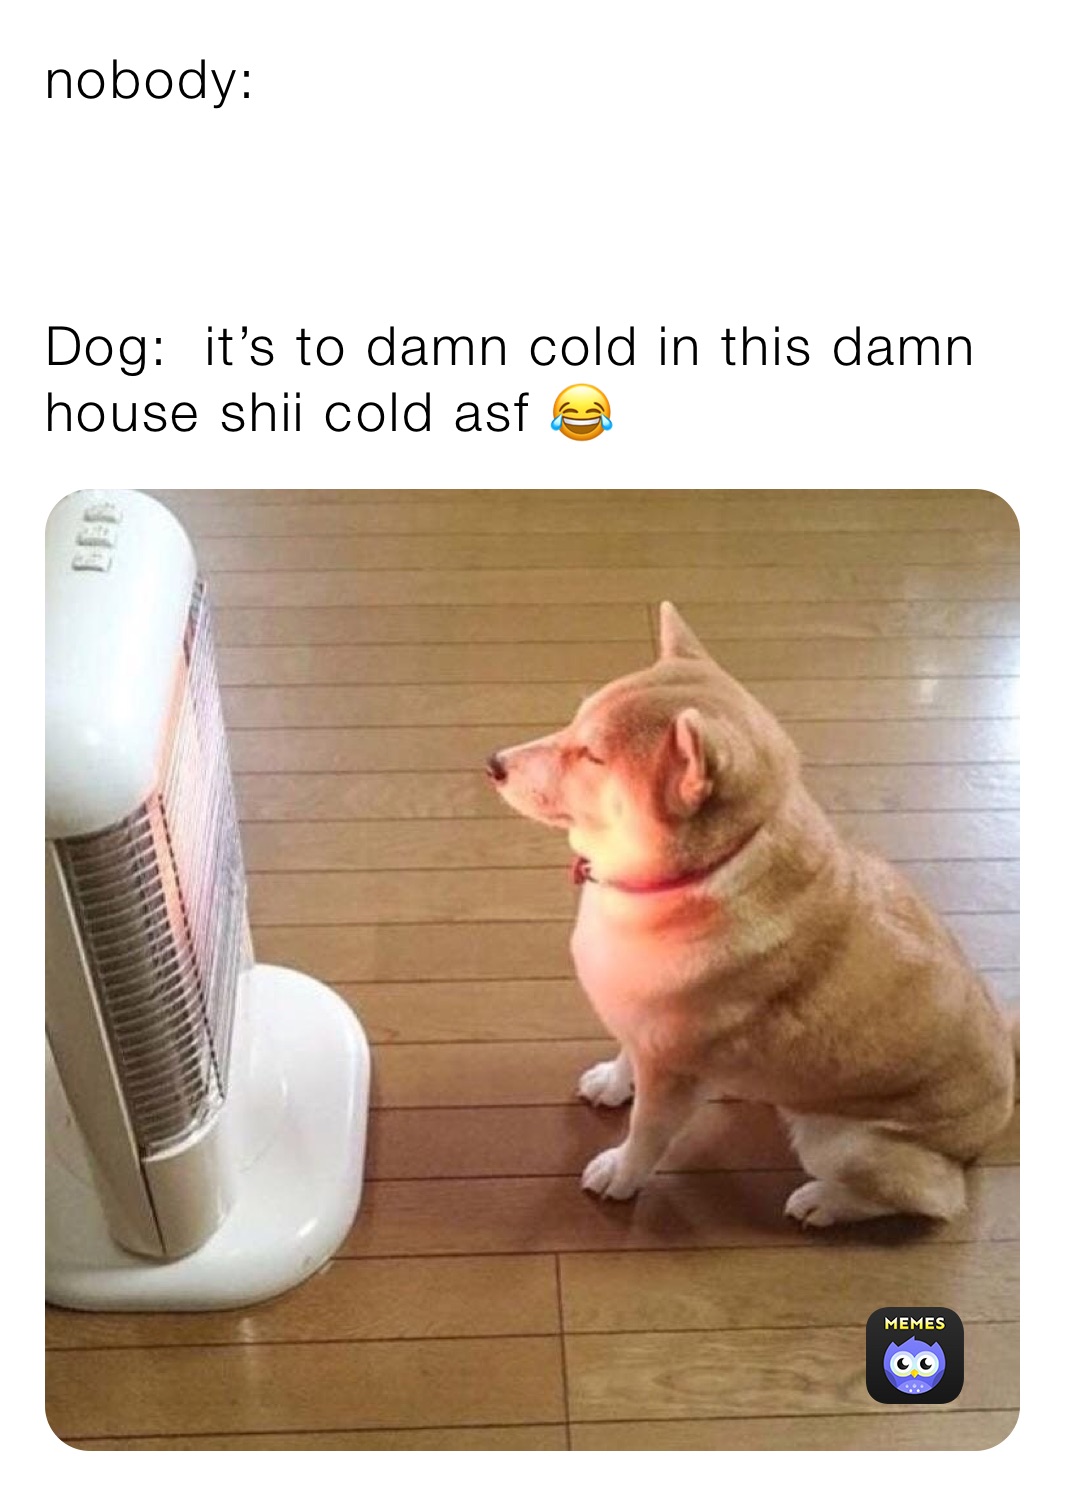 nobody:



Dog:  it’s to damn cold in this damn house shii cold asf 😂